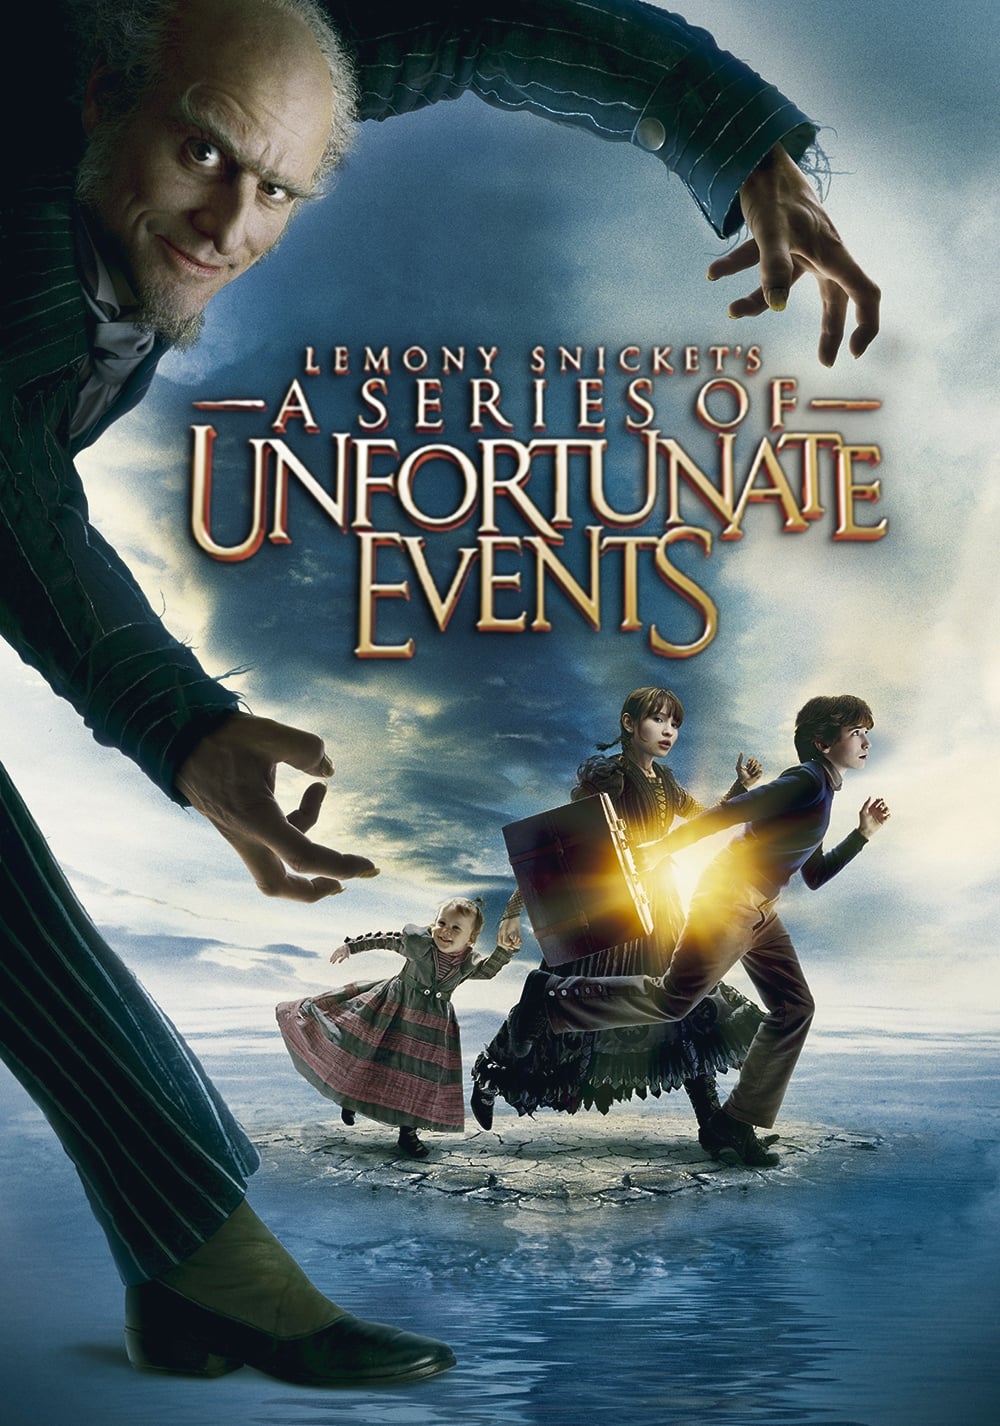 Lemony Snicket's A Series of Unfortunate Events (2004) Posters — The